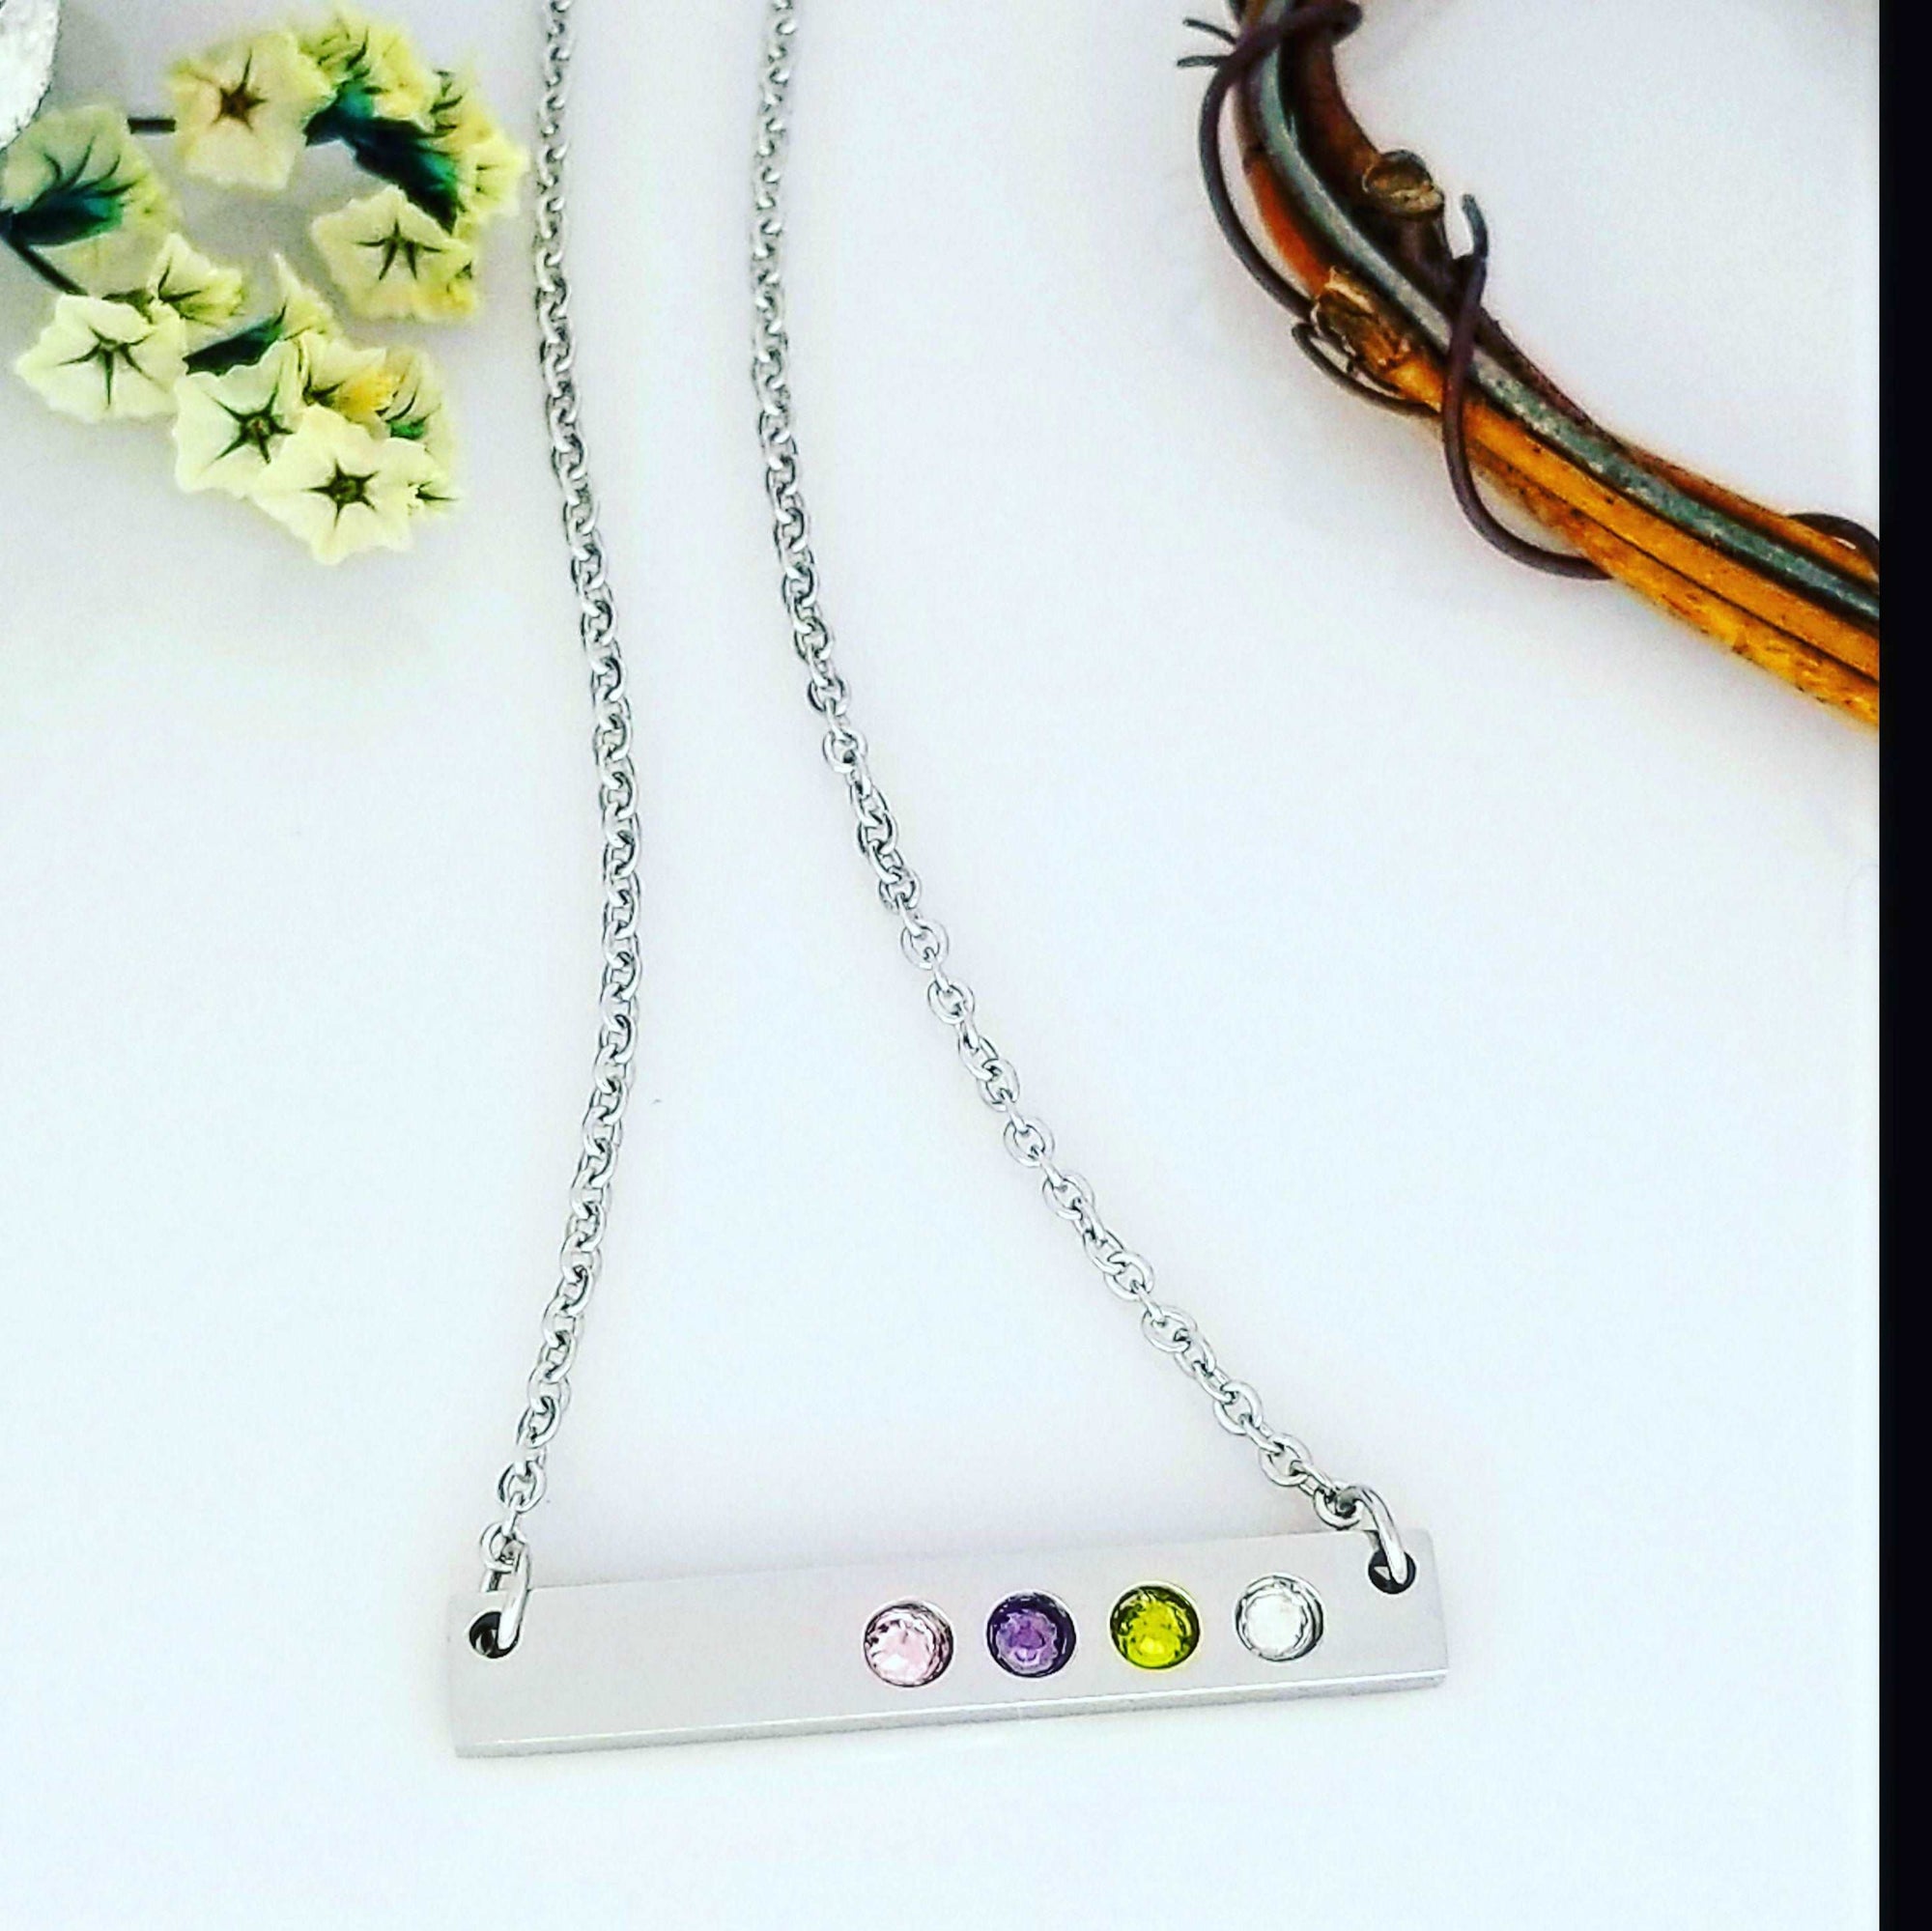 Birthstone Necklace, Bar Birthstone Necklace, Mother Jewelry, Birth Month Necklace, Mother's Day Gift, Mothers Day, Mom Gift